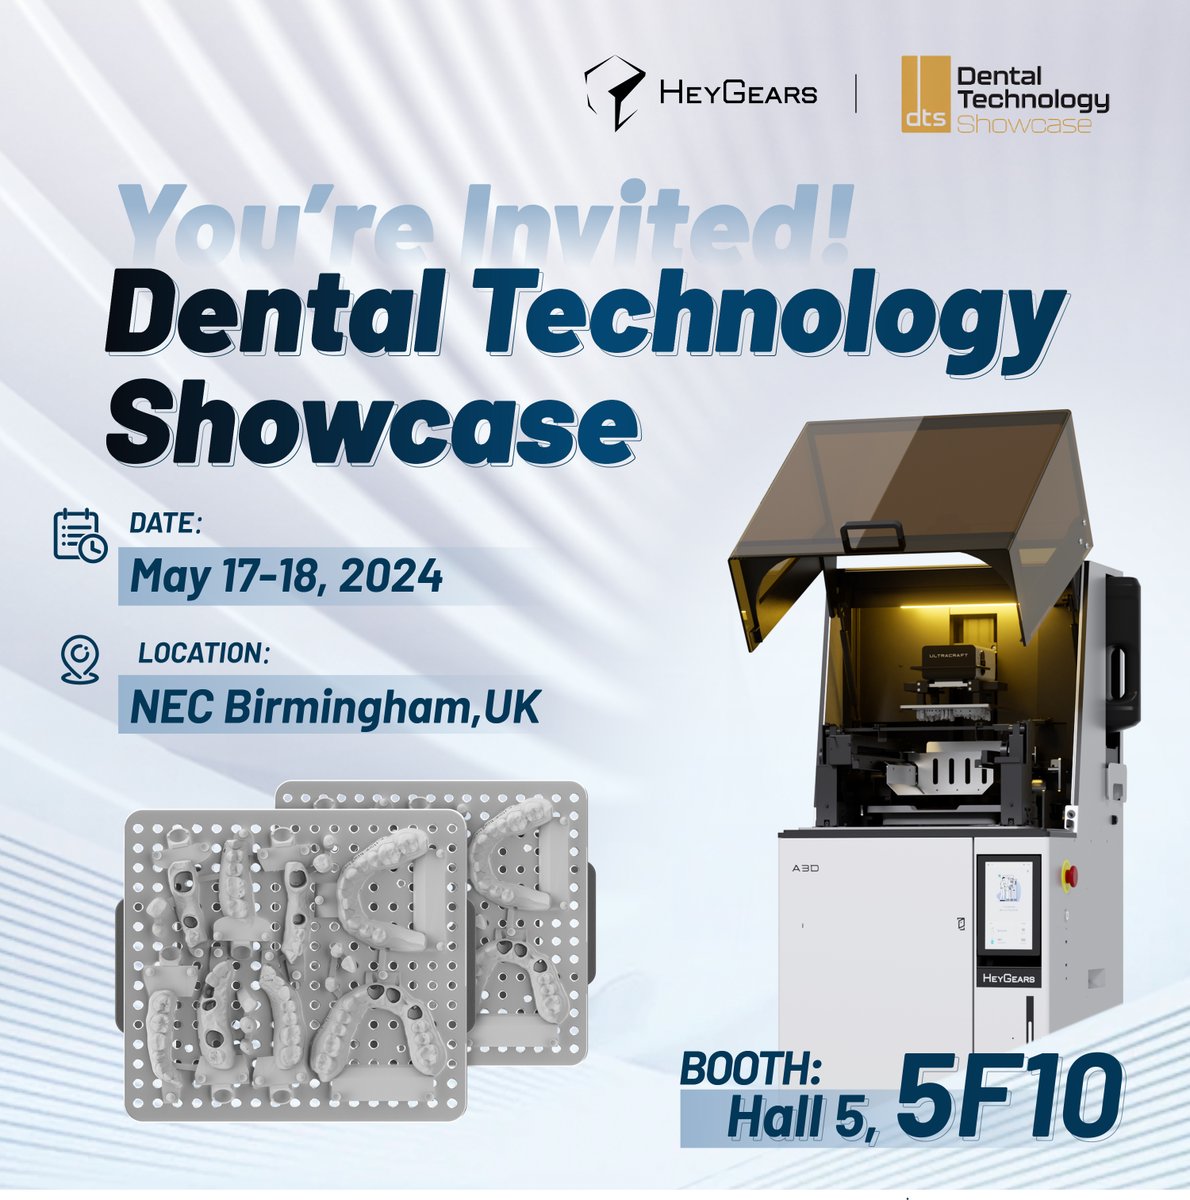 Meet #HeyGears at the Dental Technology Showcase 2024 in Birmingham, UK!
On May 17-18 you can find us at hall 5, booth 5F10, to see our automated production solution for restoration models.

Learn more: bit.ly/4aNsgy1

#DigitalDentistry #3Dprinting @dentaltechshow #DTS24